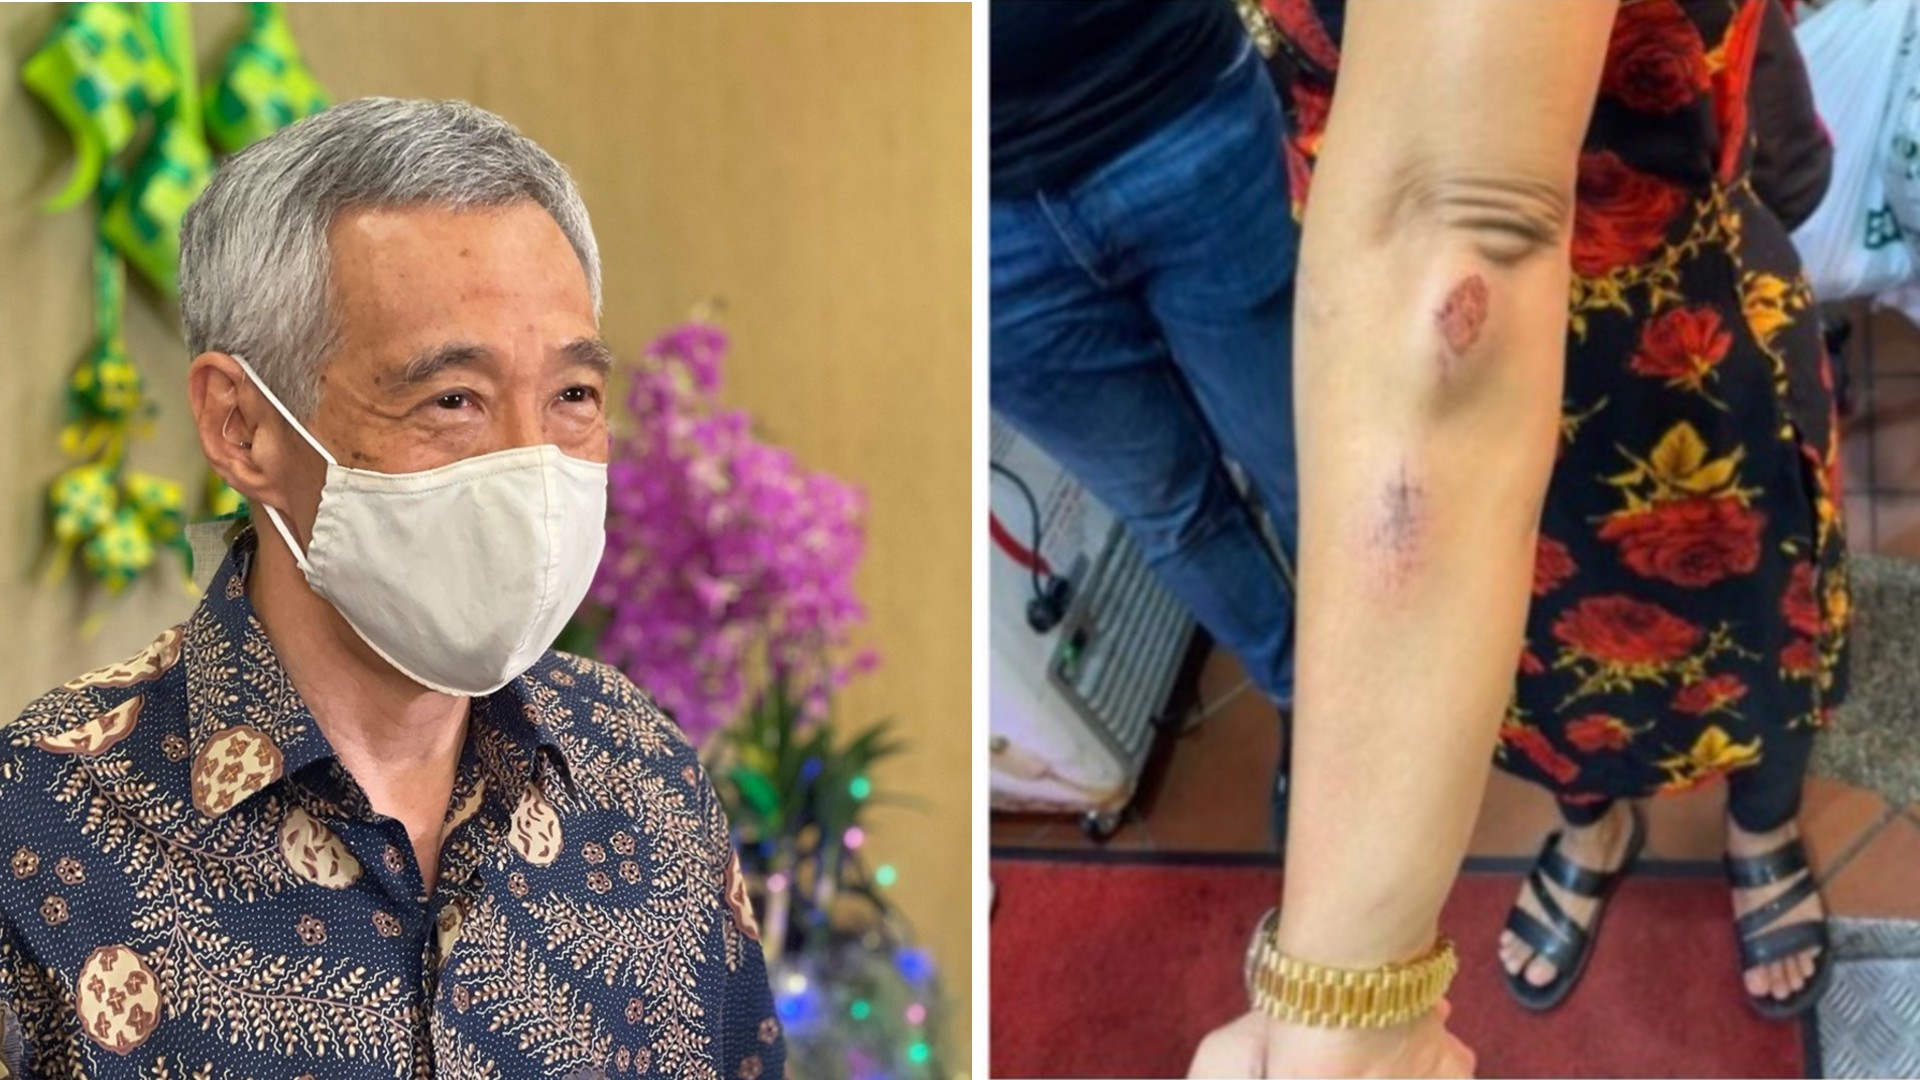 At left, Lee Hsien Loong in an April photo, wounds sustained by a woman attacked in broad daylight on Friday, at right. Photo: Lee Hsien Loong/Facebook, @Parrvyy/Instagram